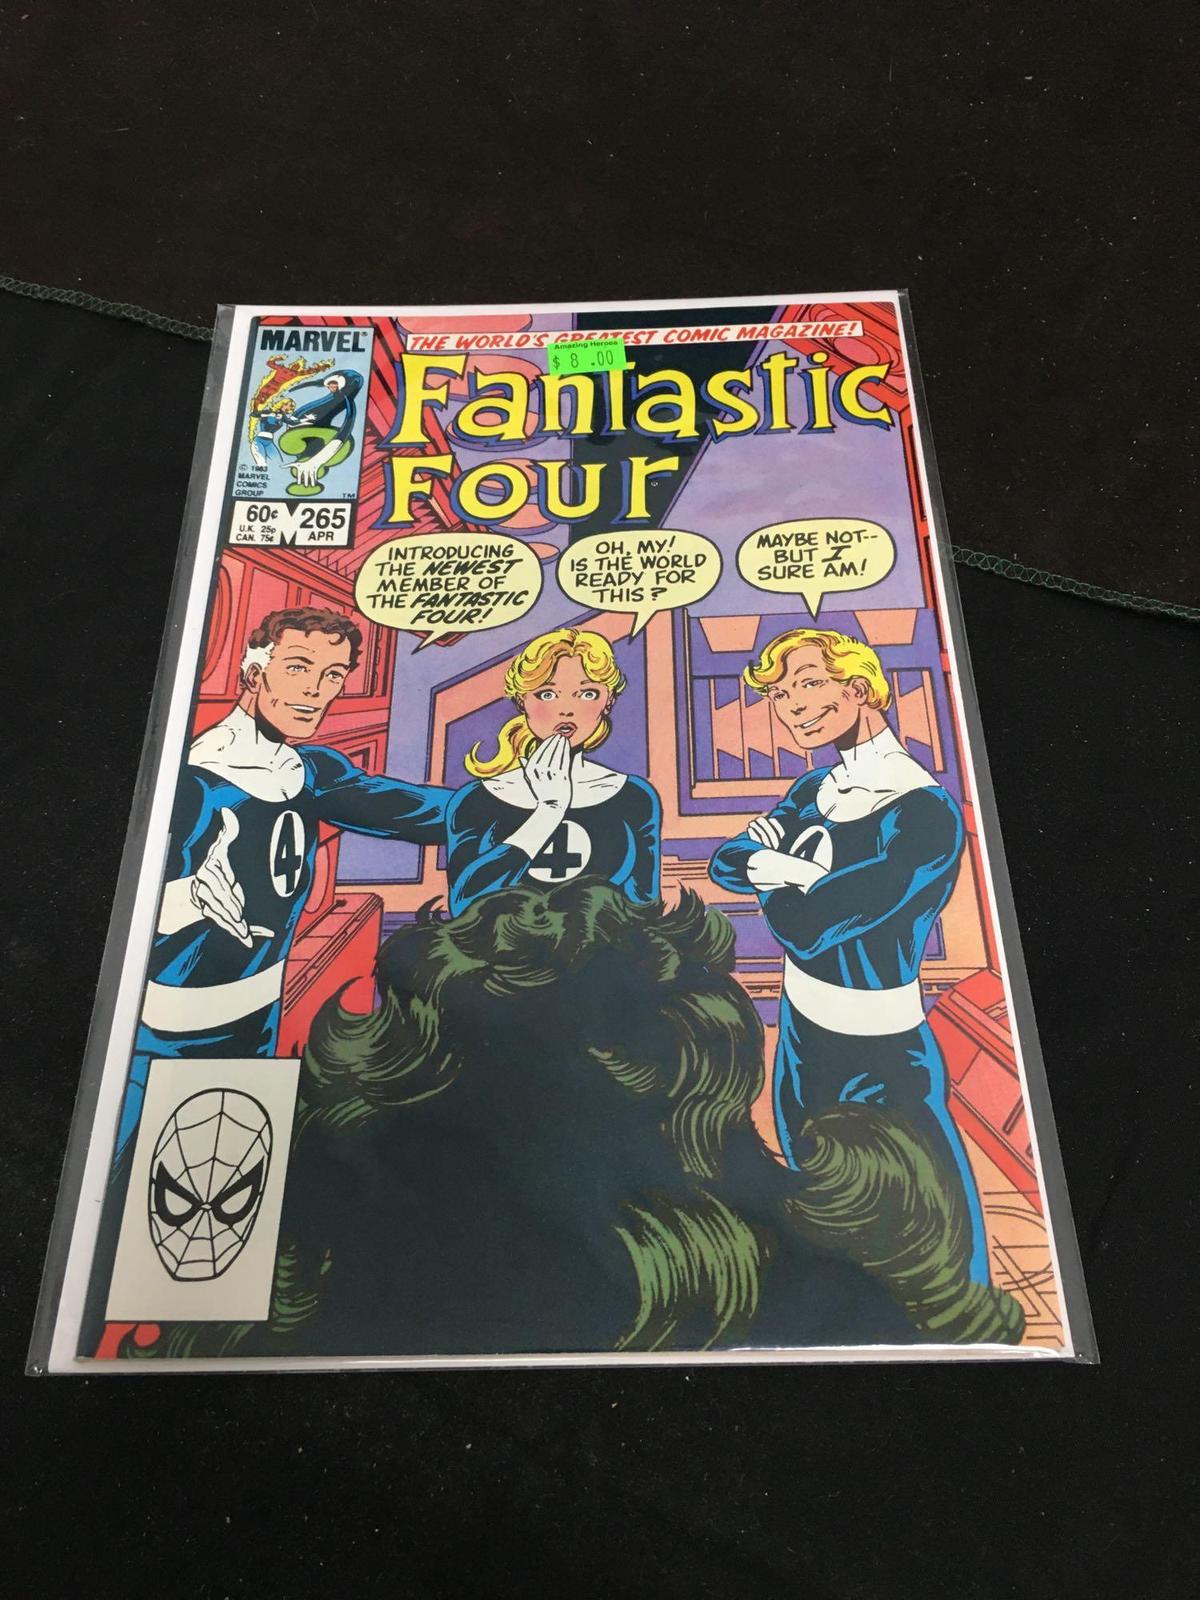 Fantastic Four #265 Comic Book from Amazing Collection